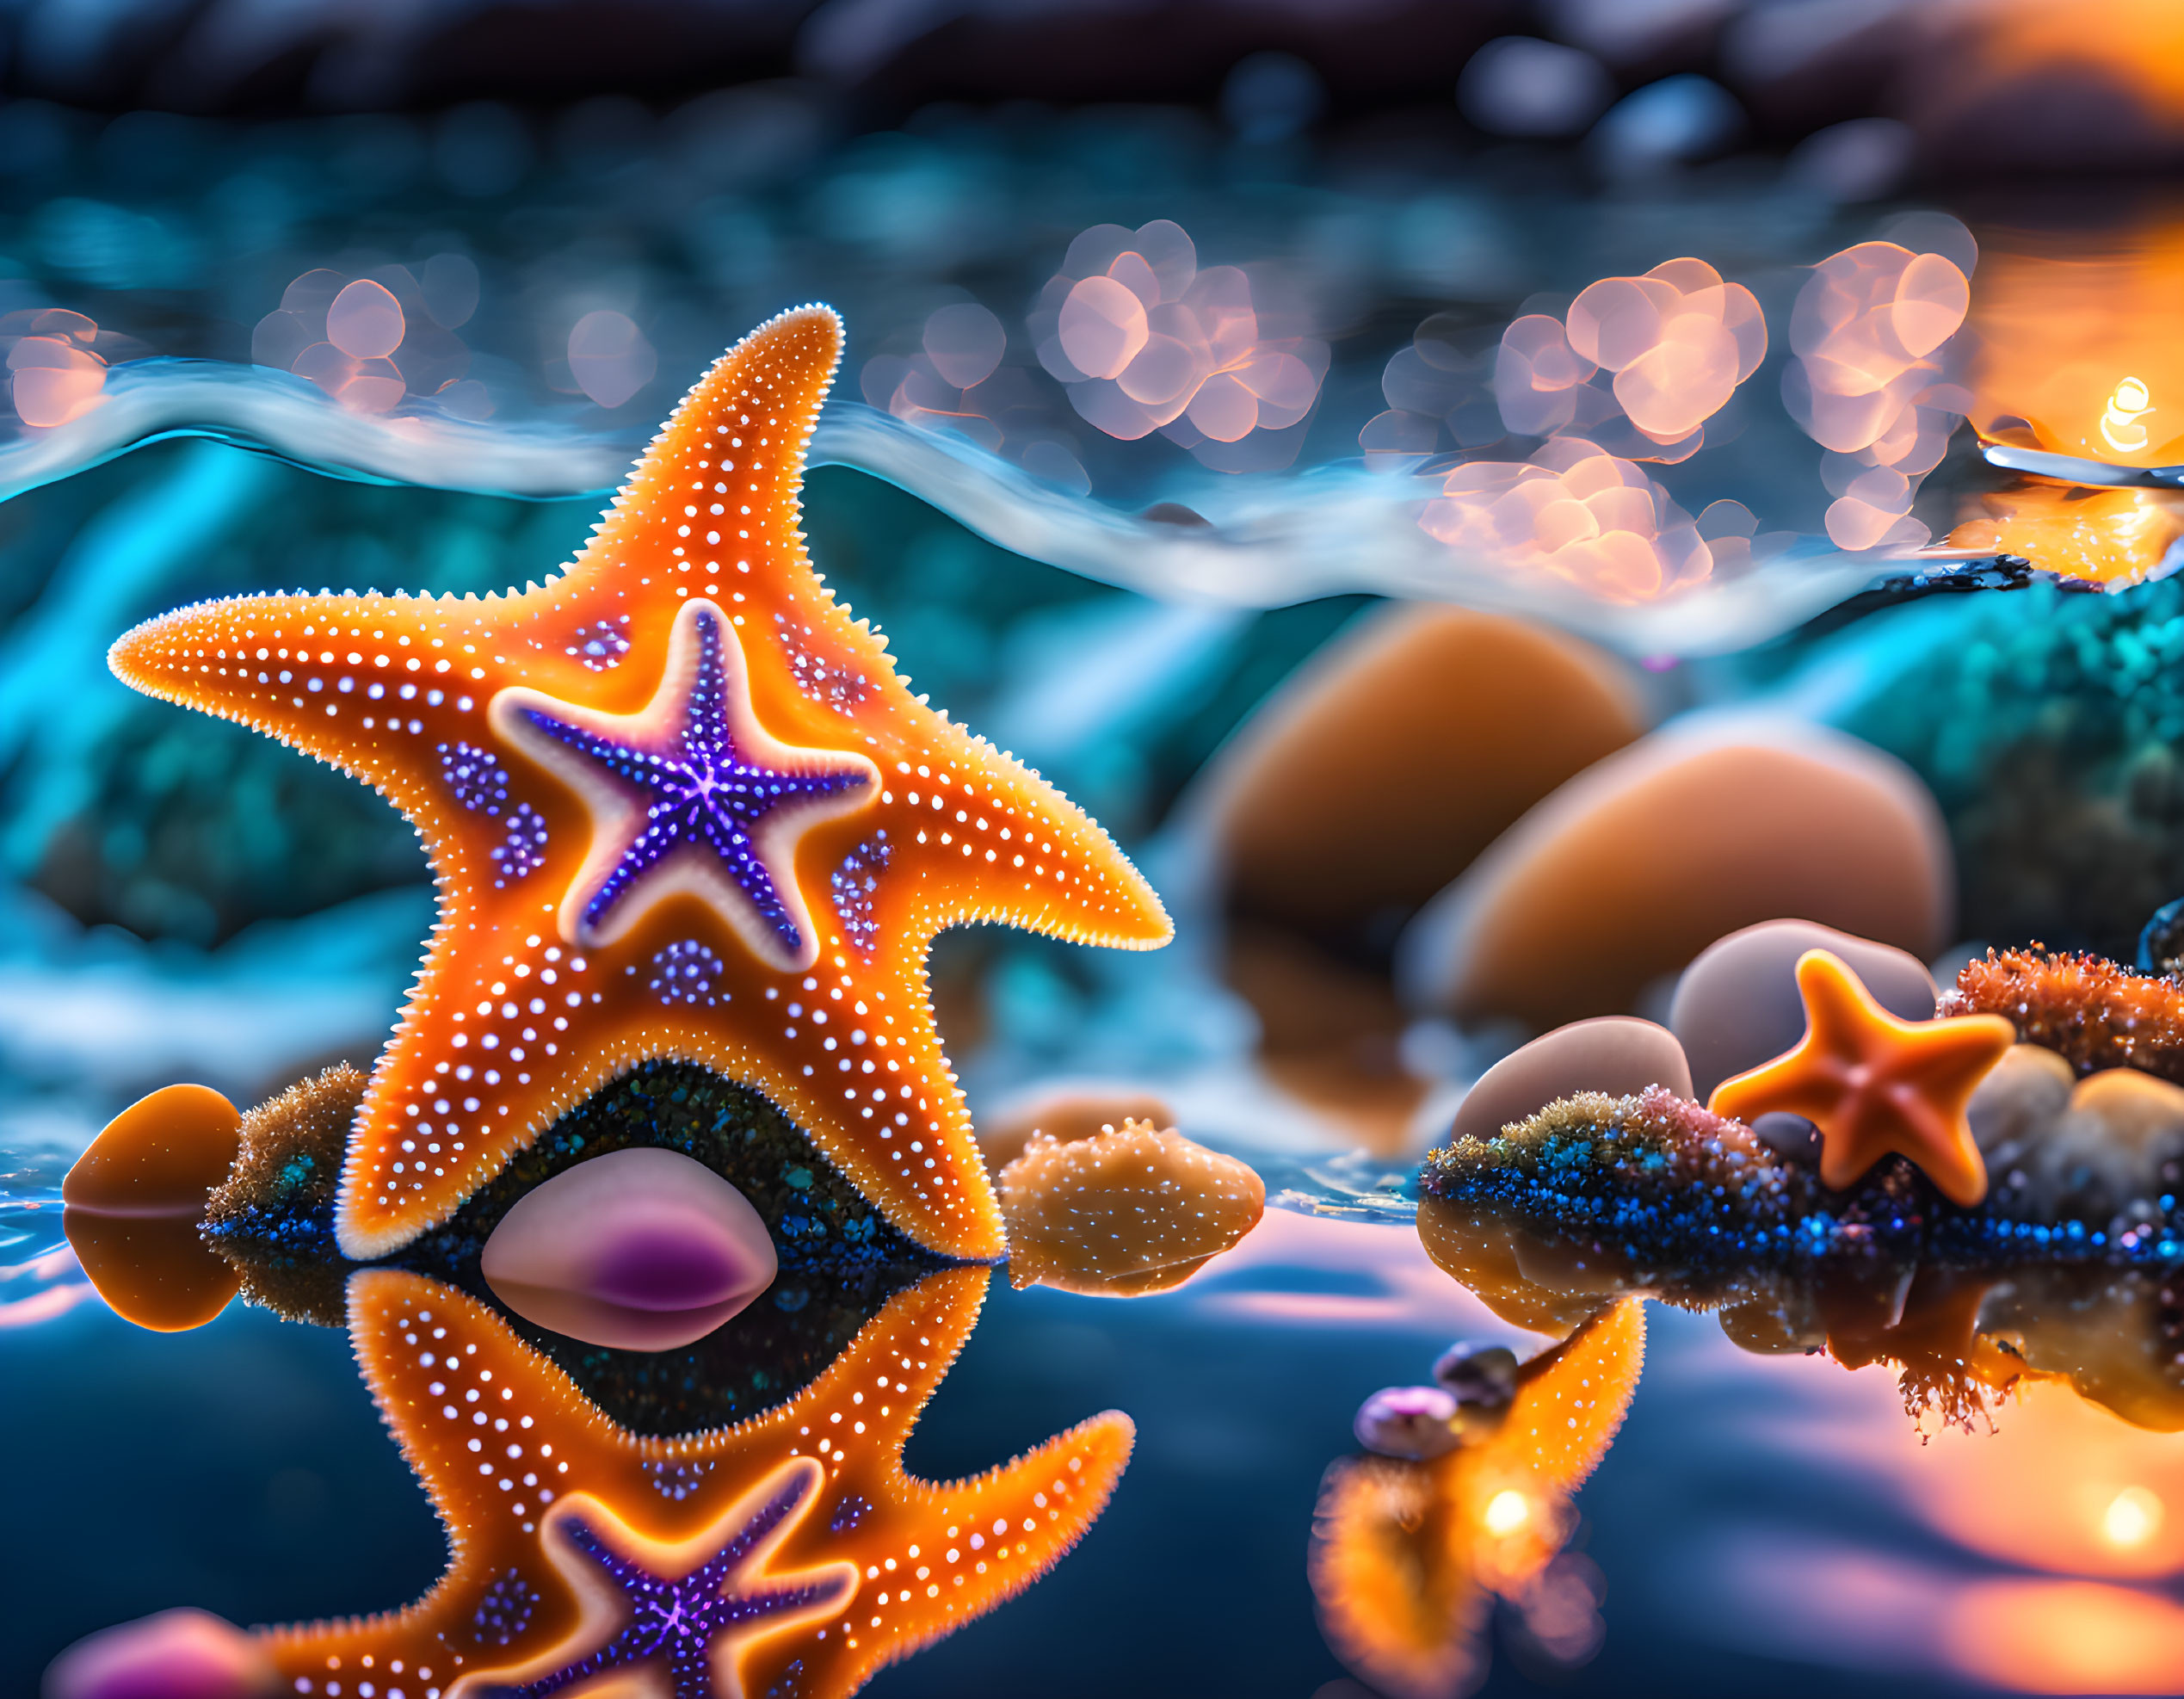 Colorful Starfish on Reflective Surface with Bokeh Lights and Smooth Pebbles